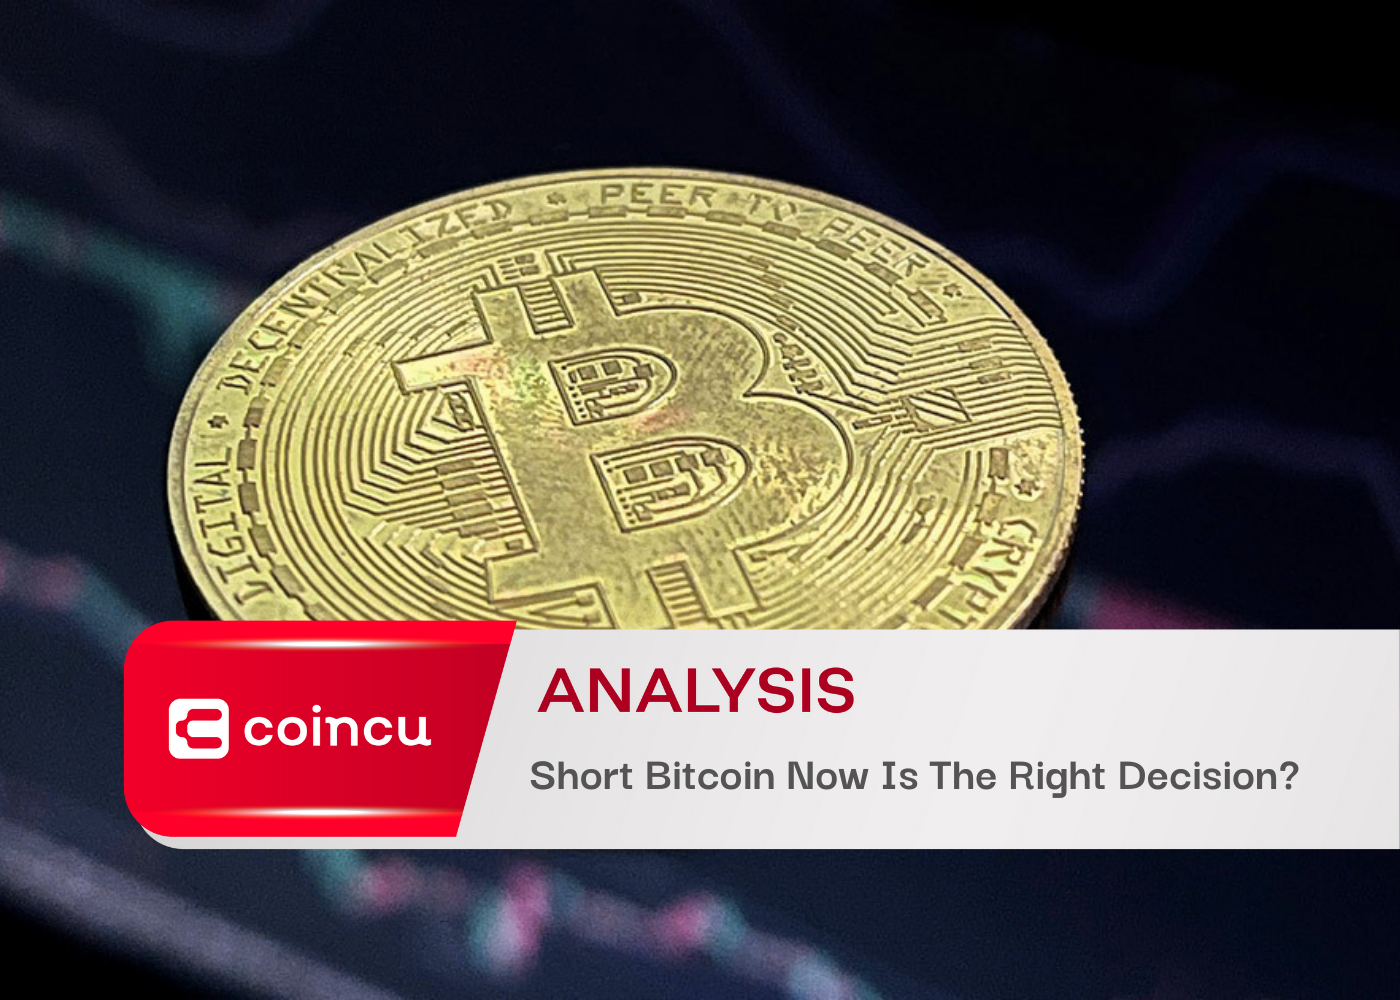 Short Bitcoin Now Is The Right Decision?